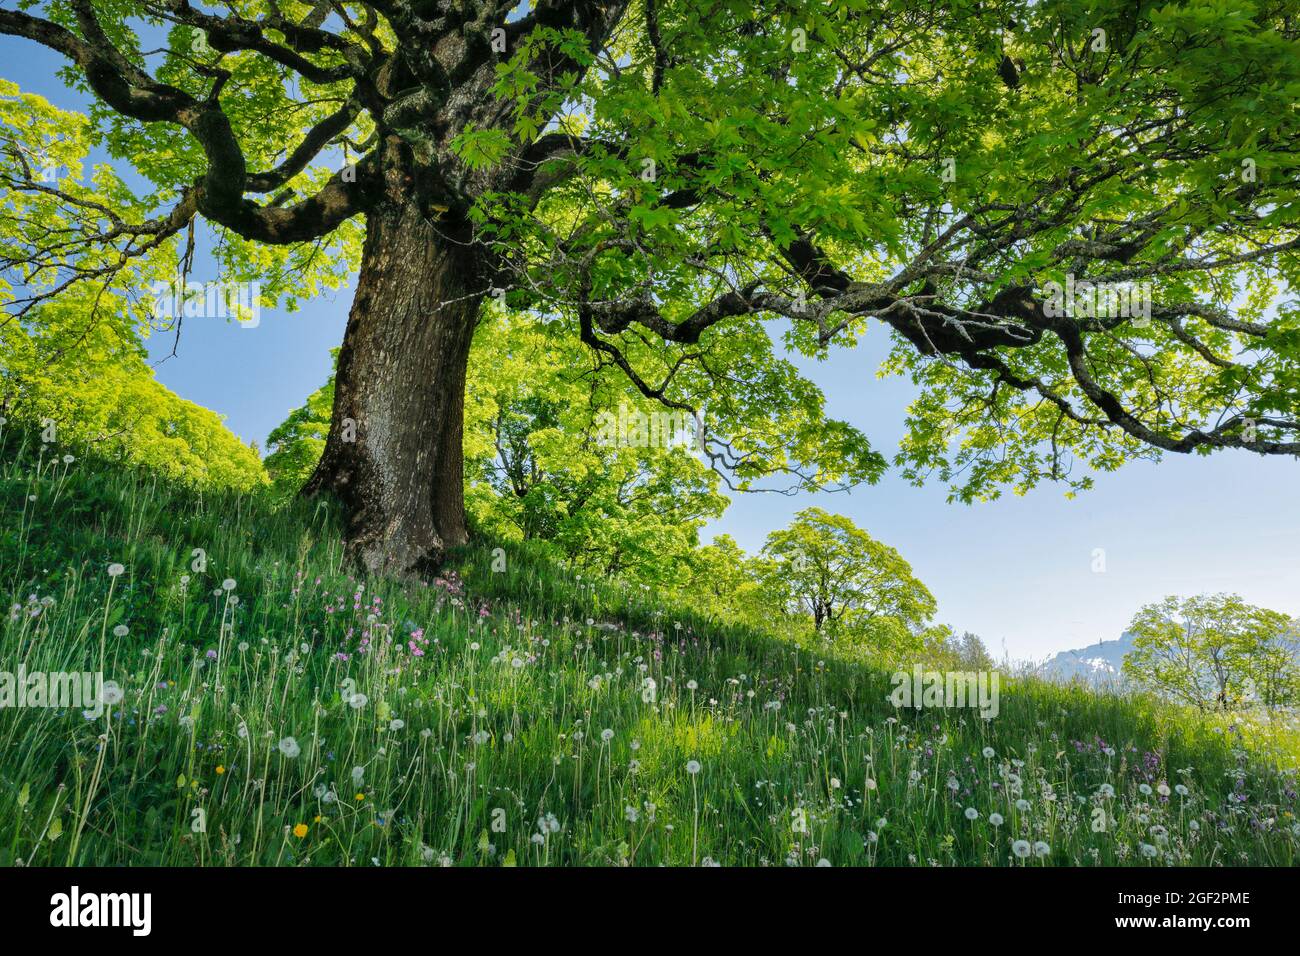 sycamore maple, great maple (Acer pseudoplatanus), sycamore maple grove in spring, near Ennetbuehl, Toggenburg, Switzerland, St. Gallen Stock Photo